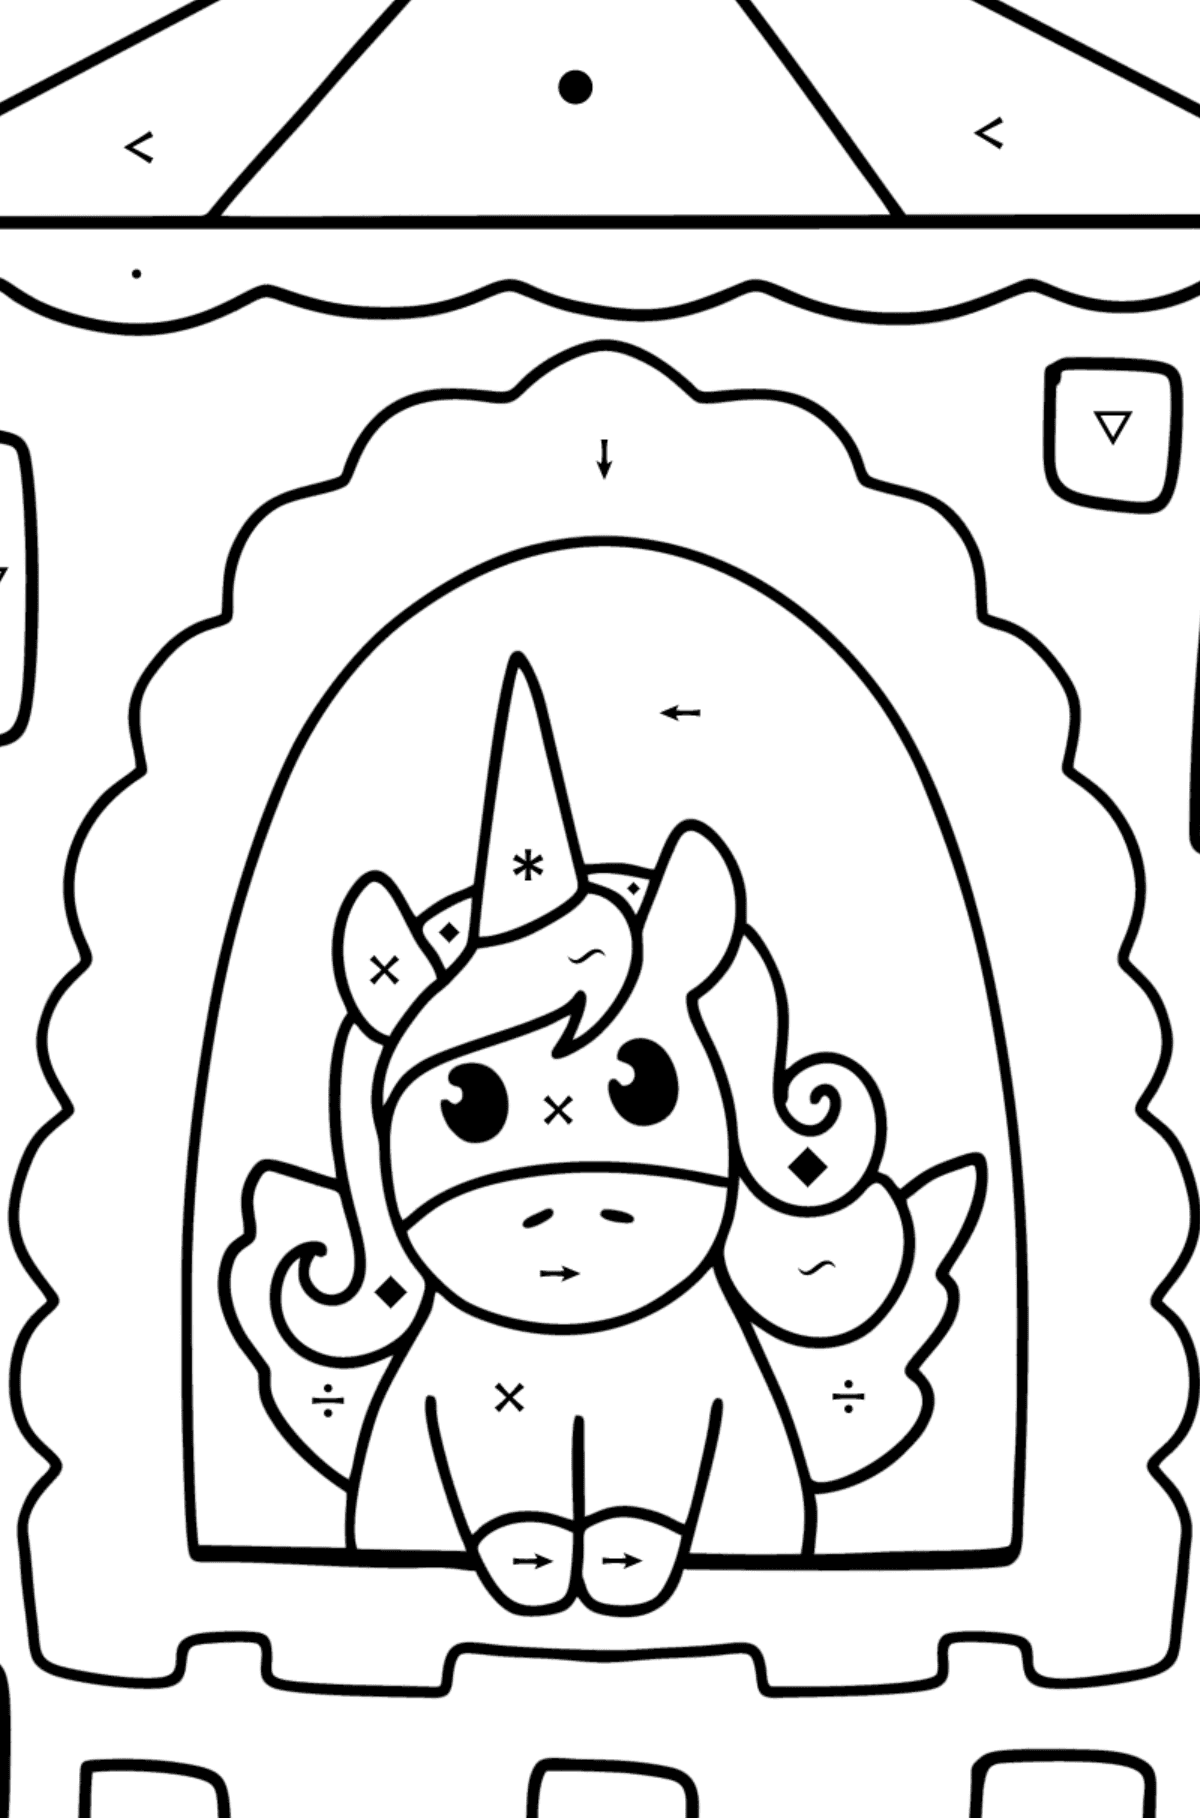 Unicorn in fairyland coloring page - Coloring by Symbols for Kids